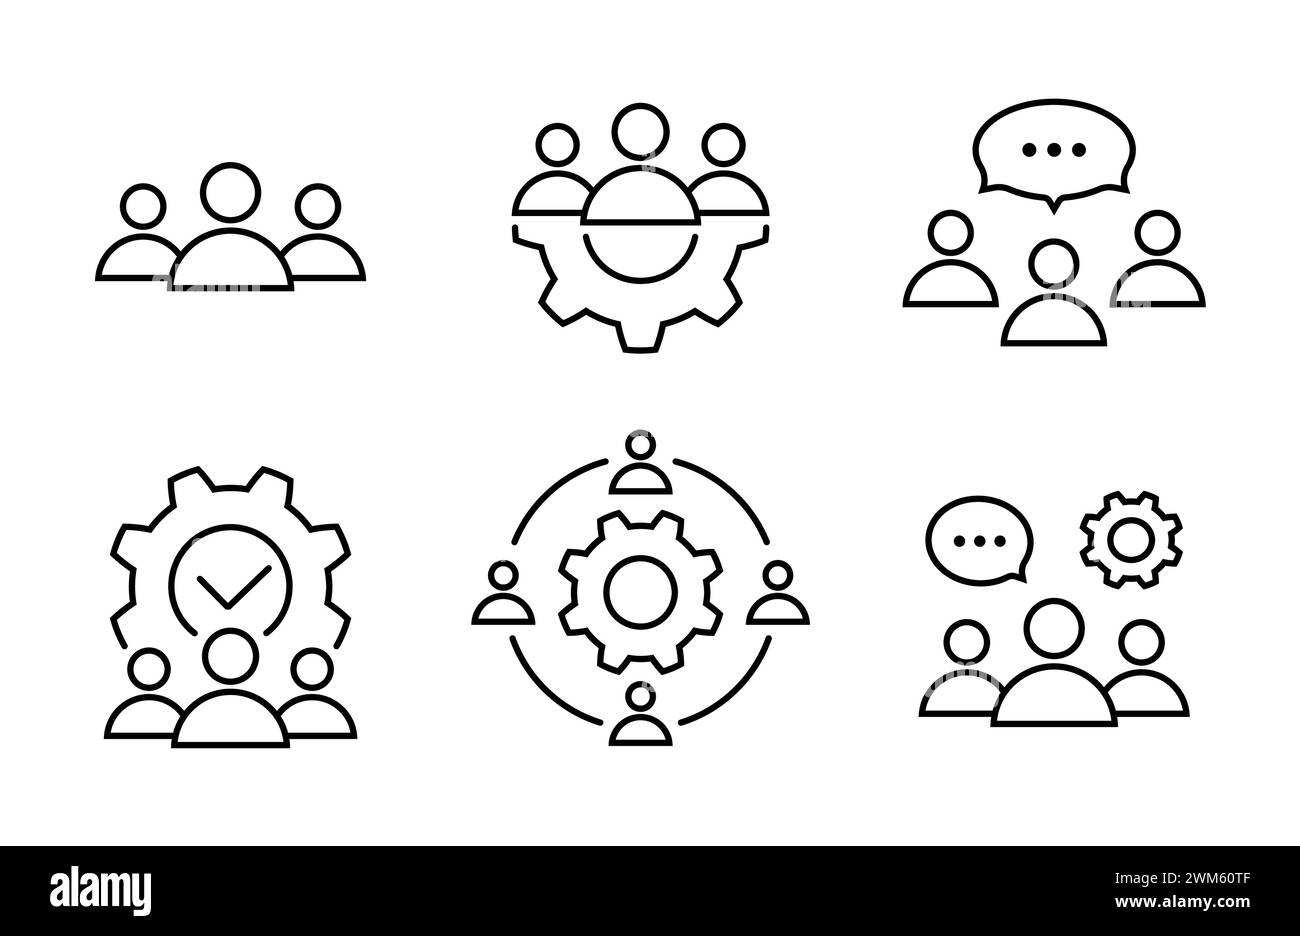 Business line icon set in flat style. Teamwork, chat or discussion, process and brainstorming symbols on white. Simple abstract icons. Vector illustra Stock Vector